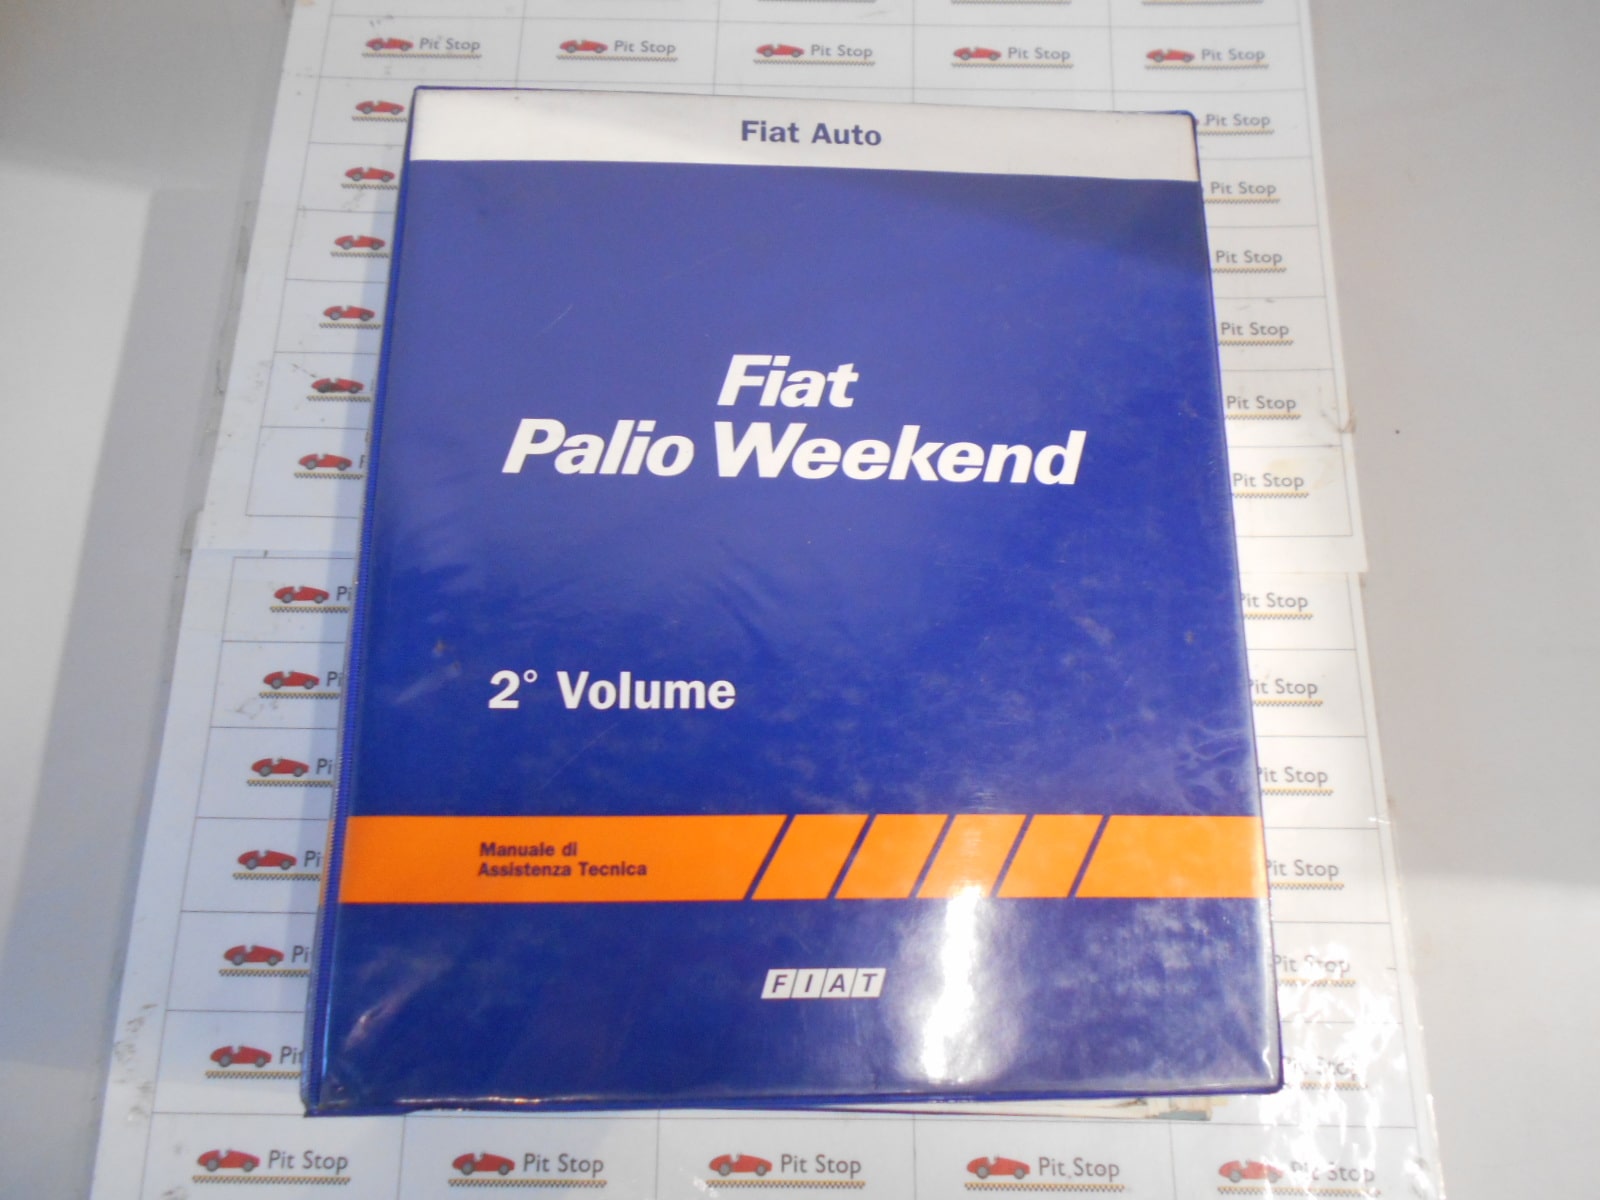 Manuale officina Fiat Palio Weekend, secondo volume